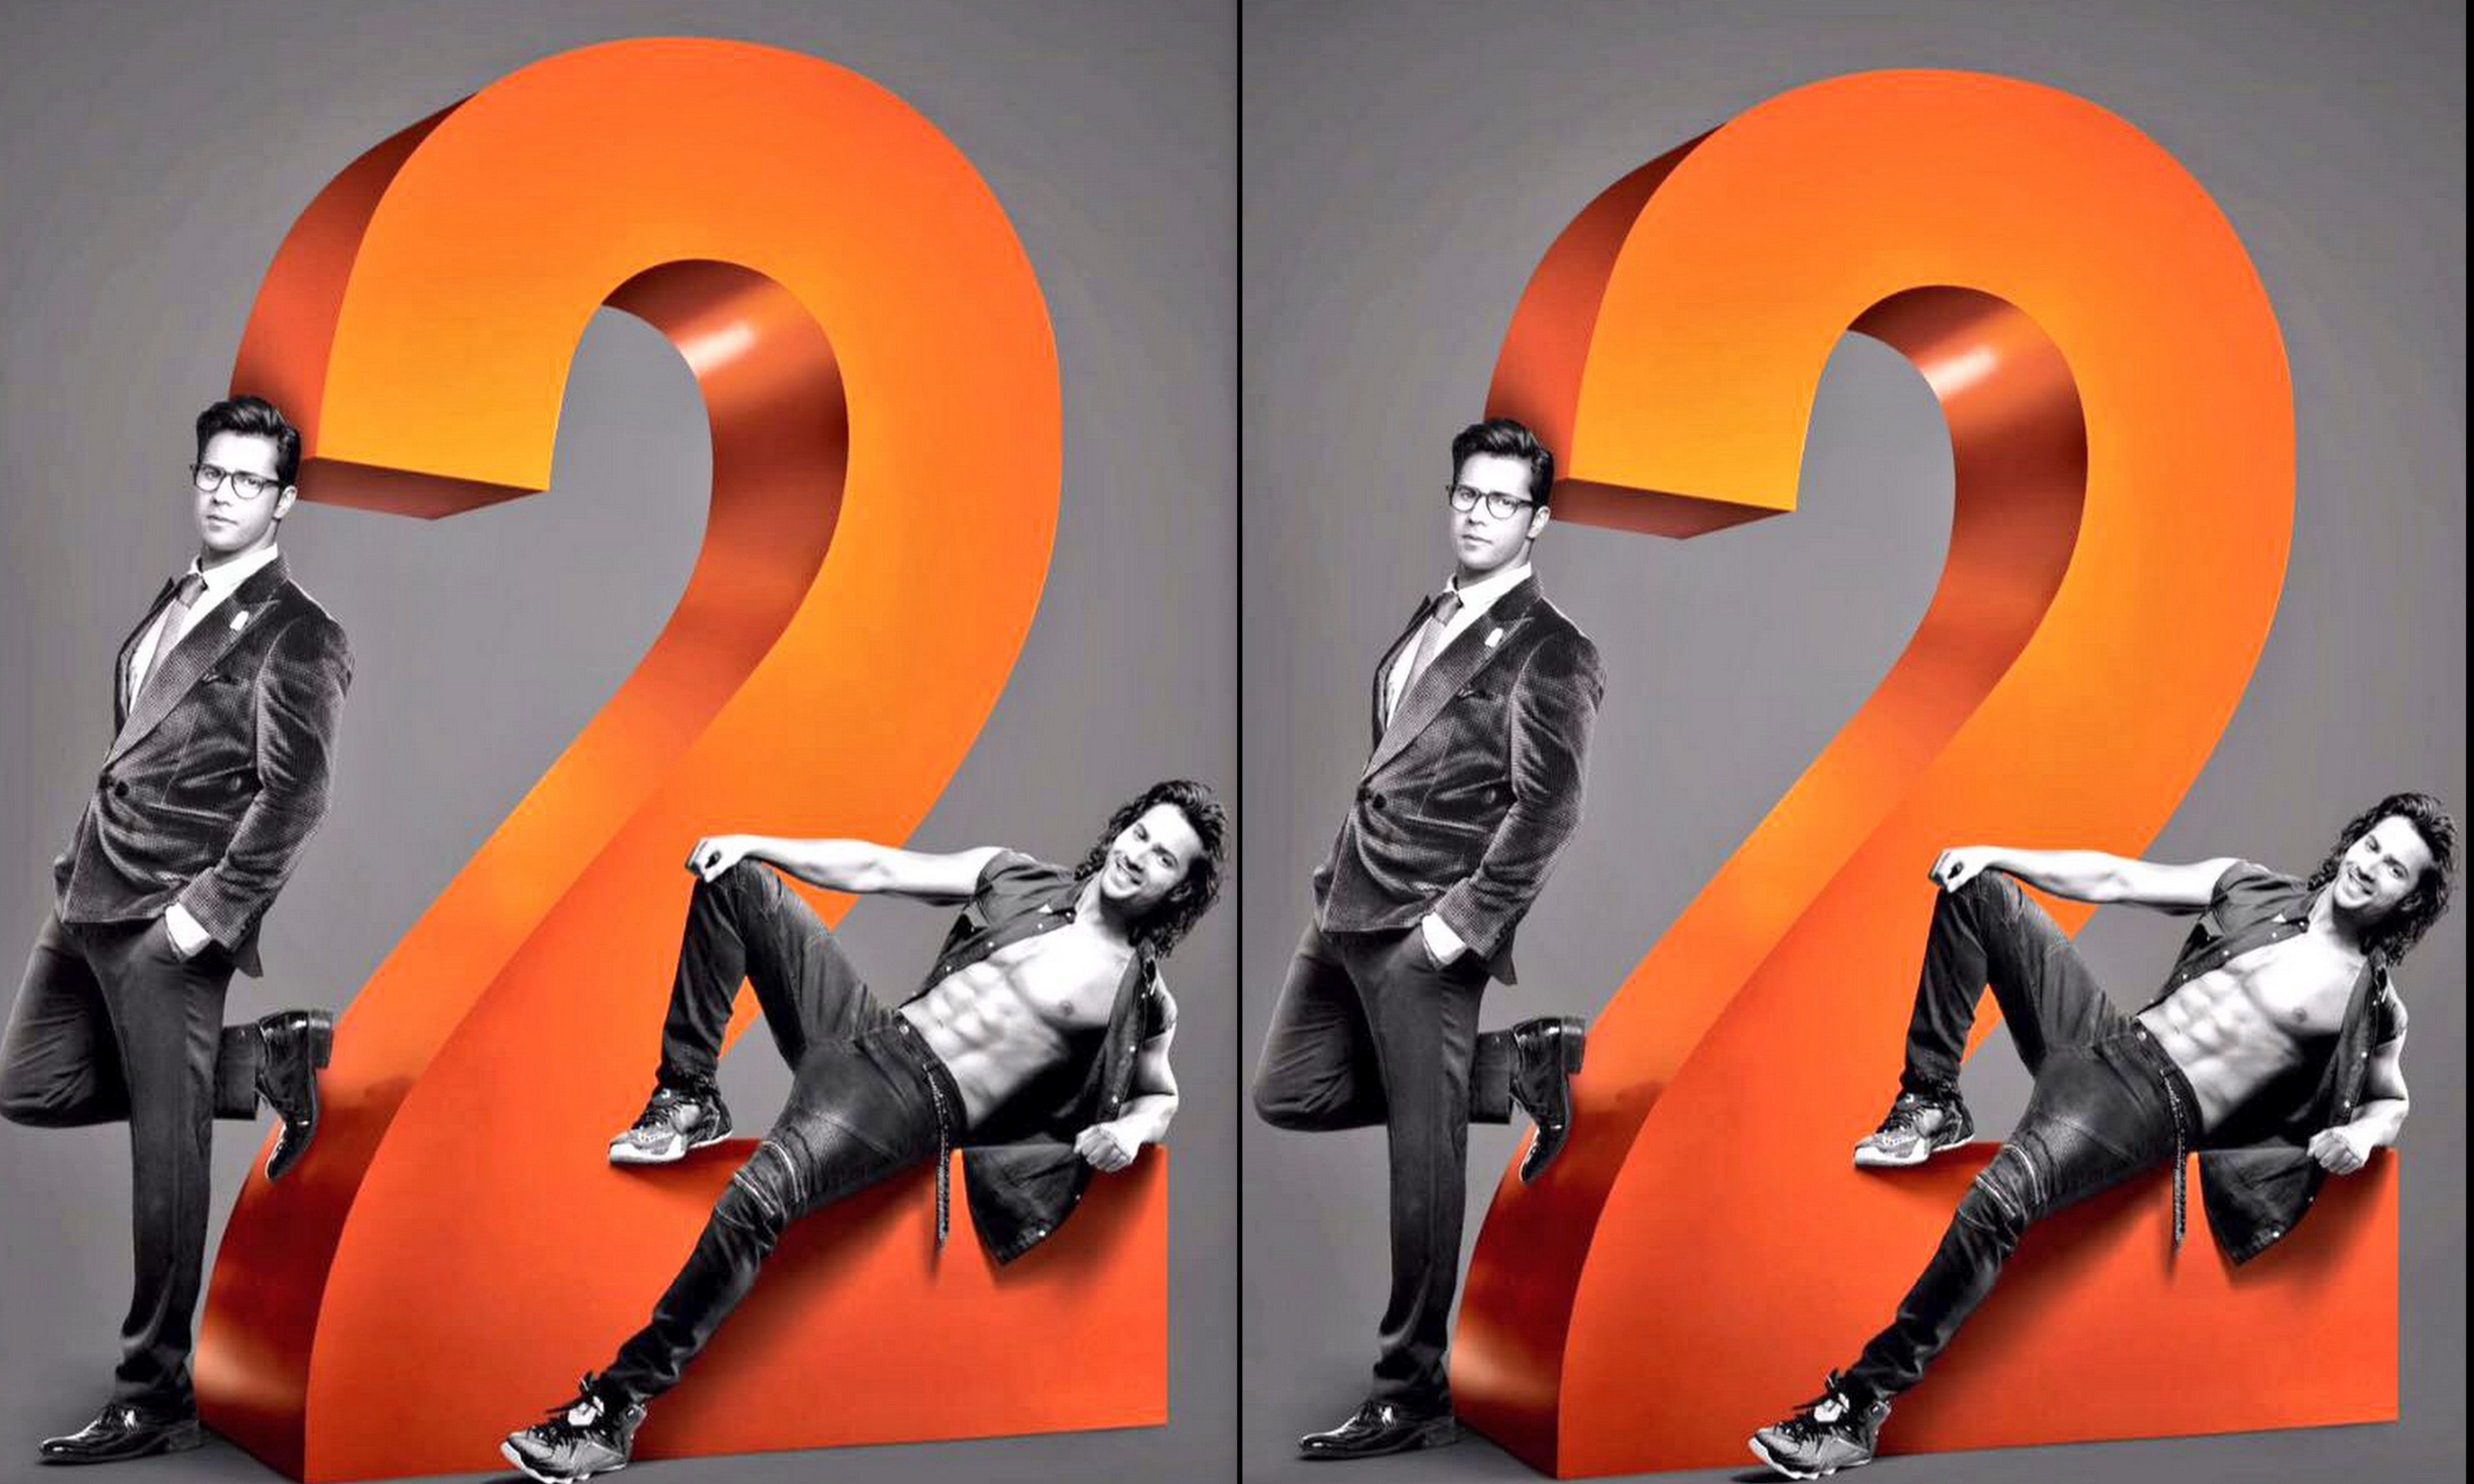 Varun Dhawan posted a video on his twitter account inviting the real life twins to launch his upcoming movie "Judwaa 2"